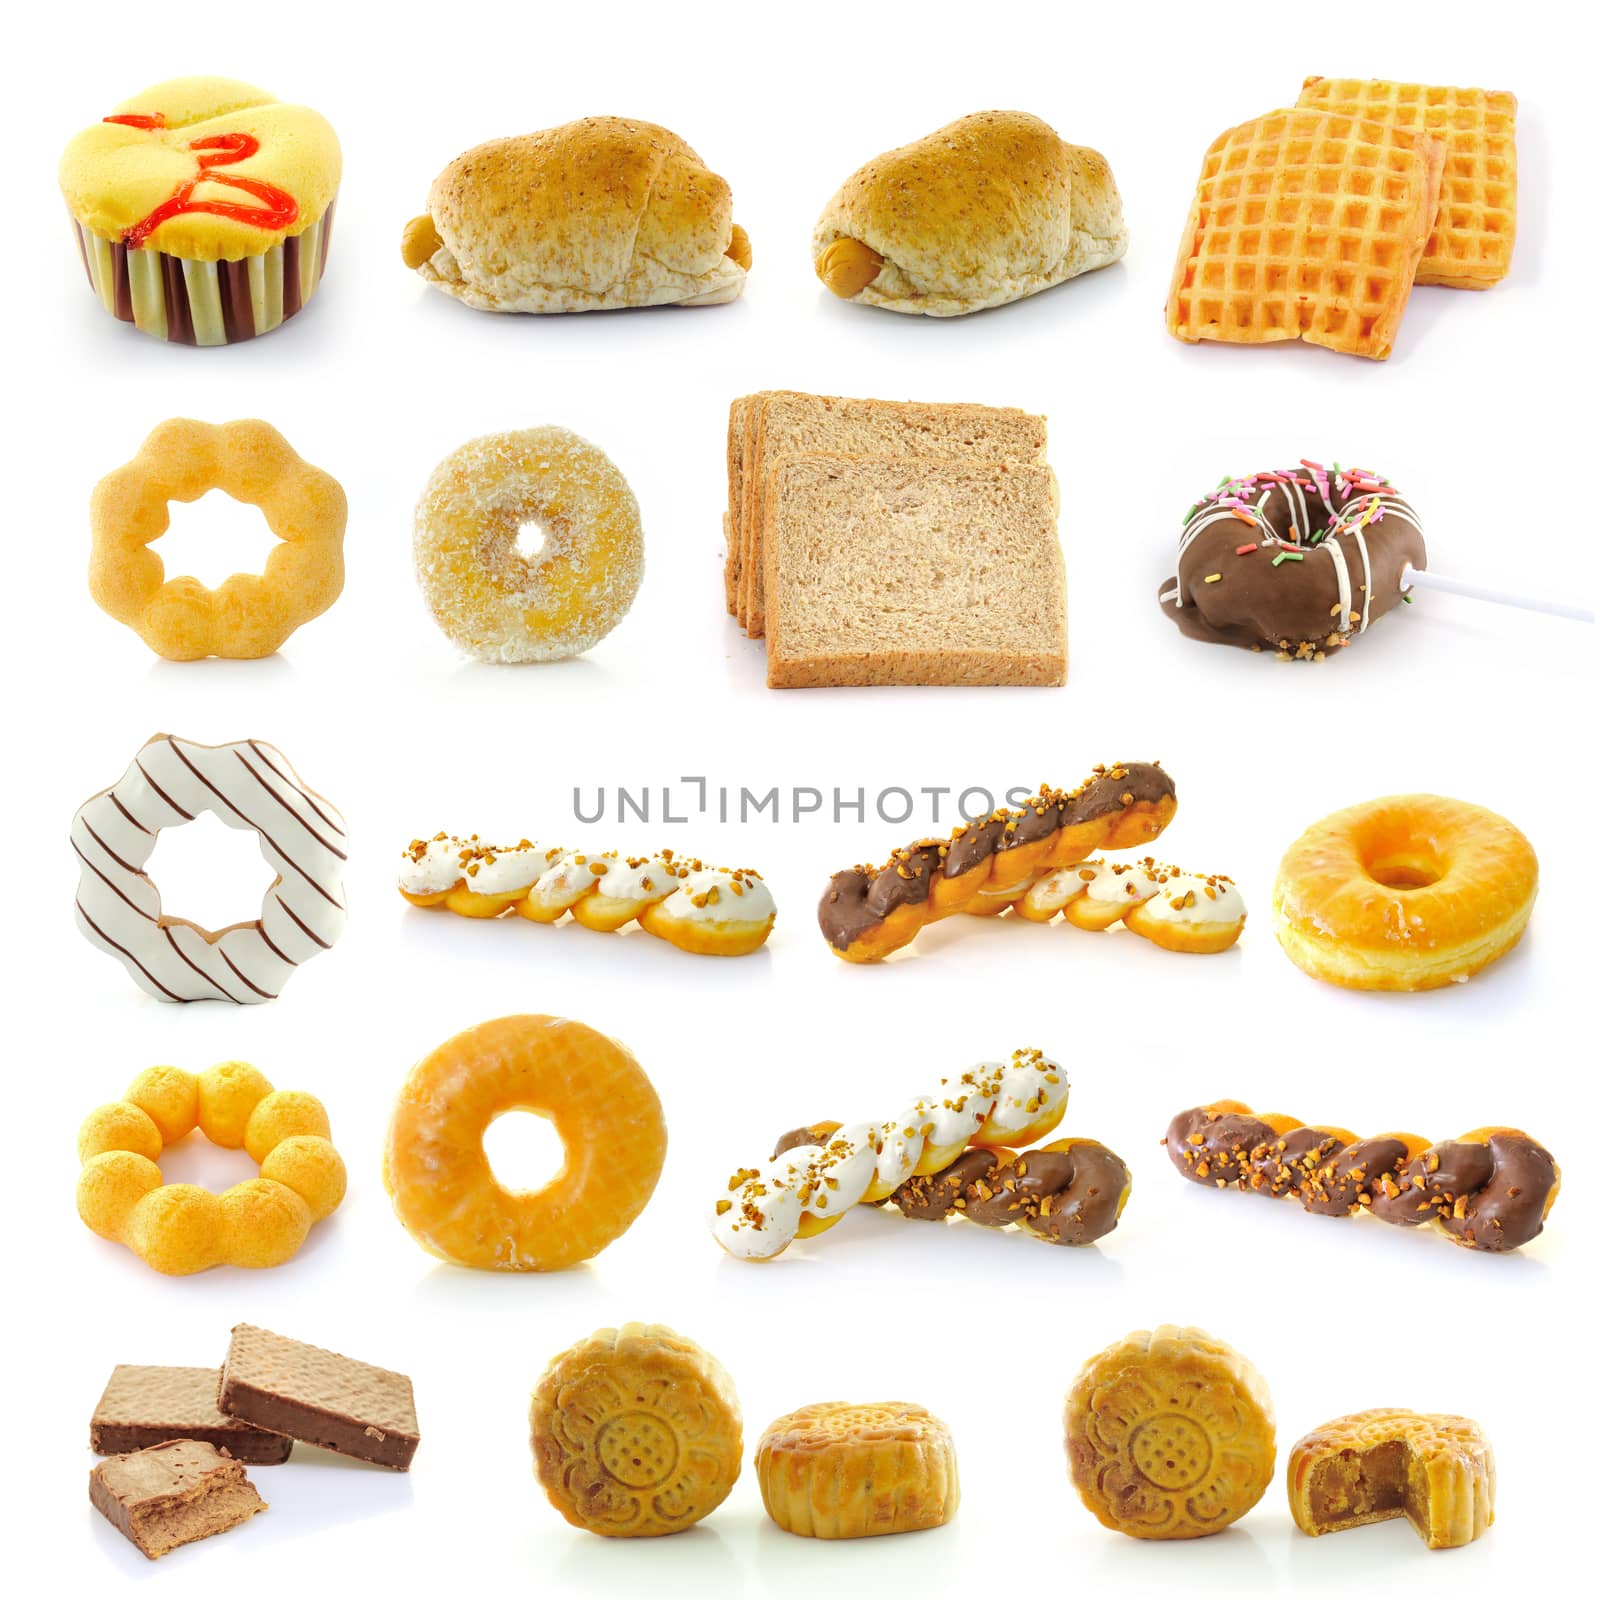 Bread, donuts, cakes, bread, sausage,  Mooncakes isolated on white background